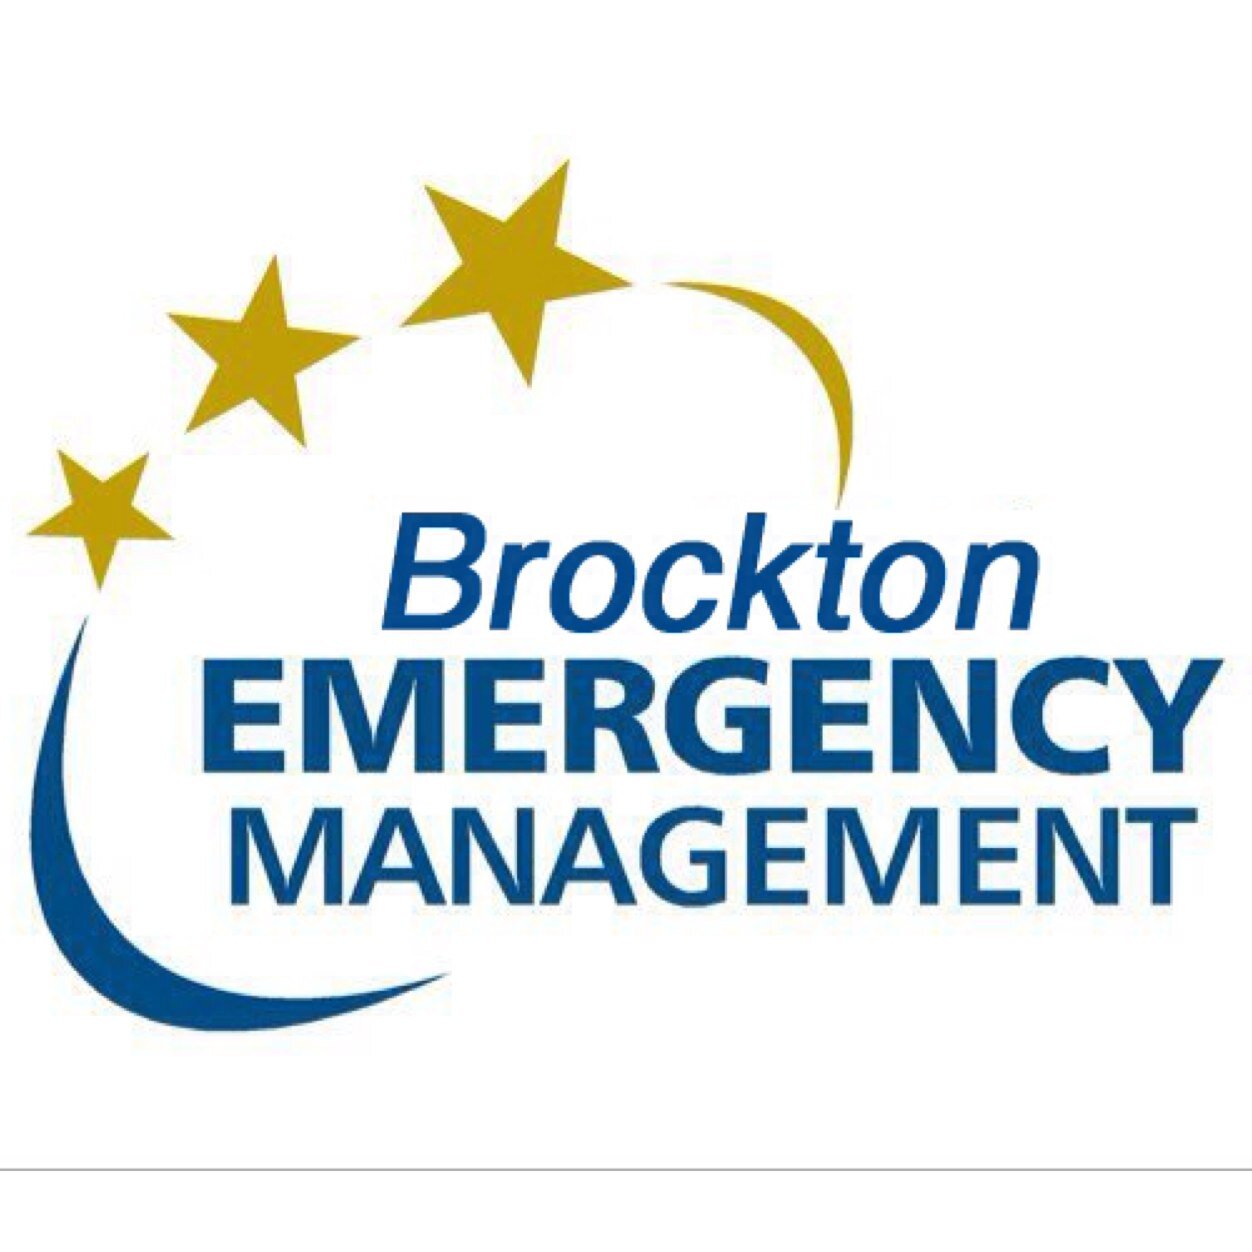 The Brockton Emergency Management Agency (BEMA) is responsible for coordinating with state and federal authorities to protect the public during disasters